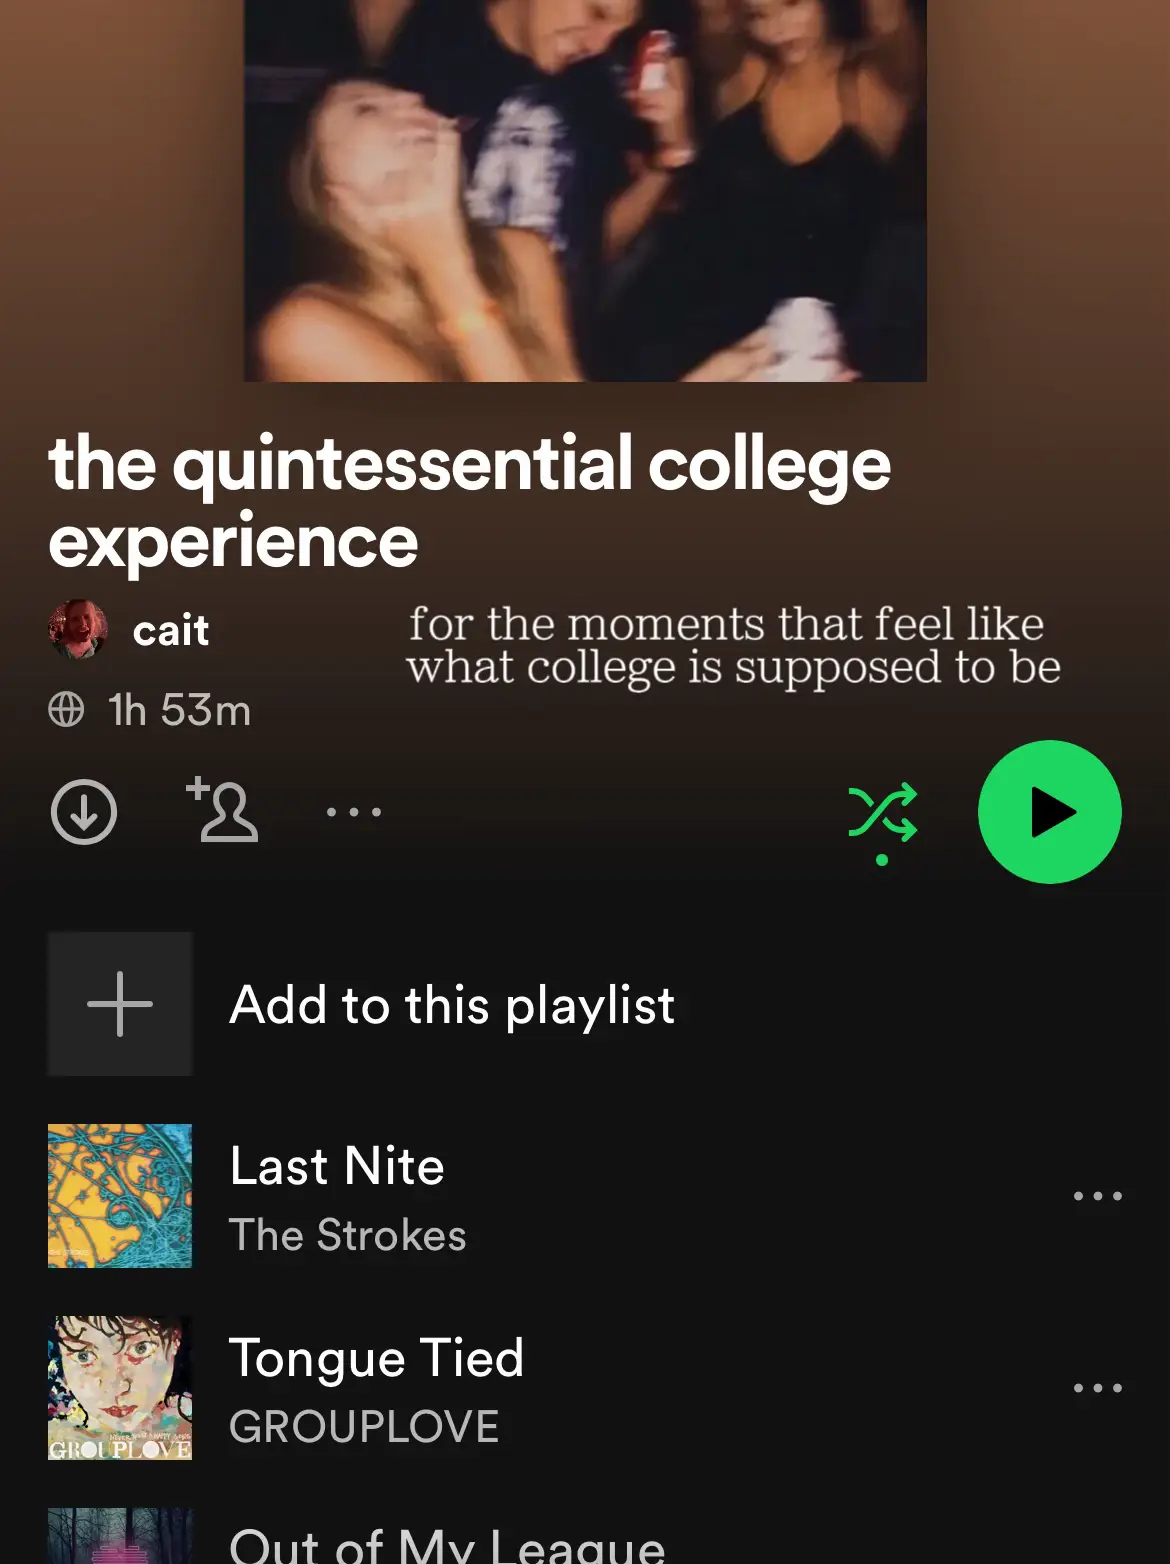  A playlist of music for the quintessential college experience